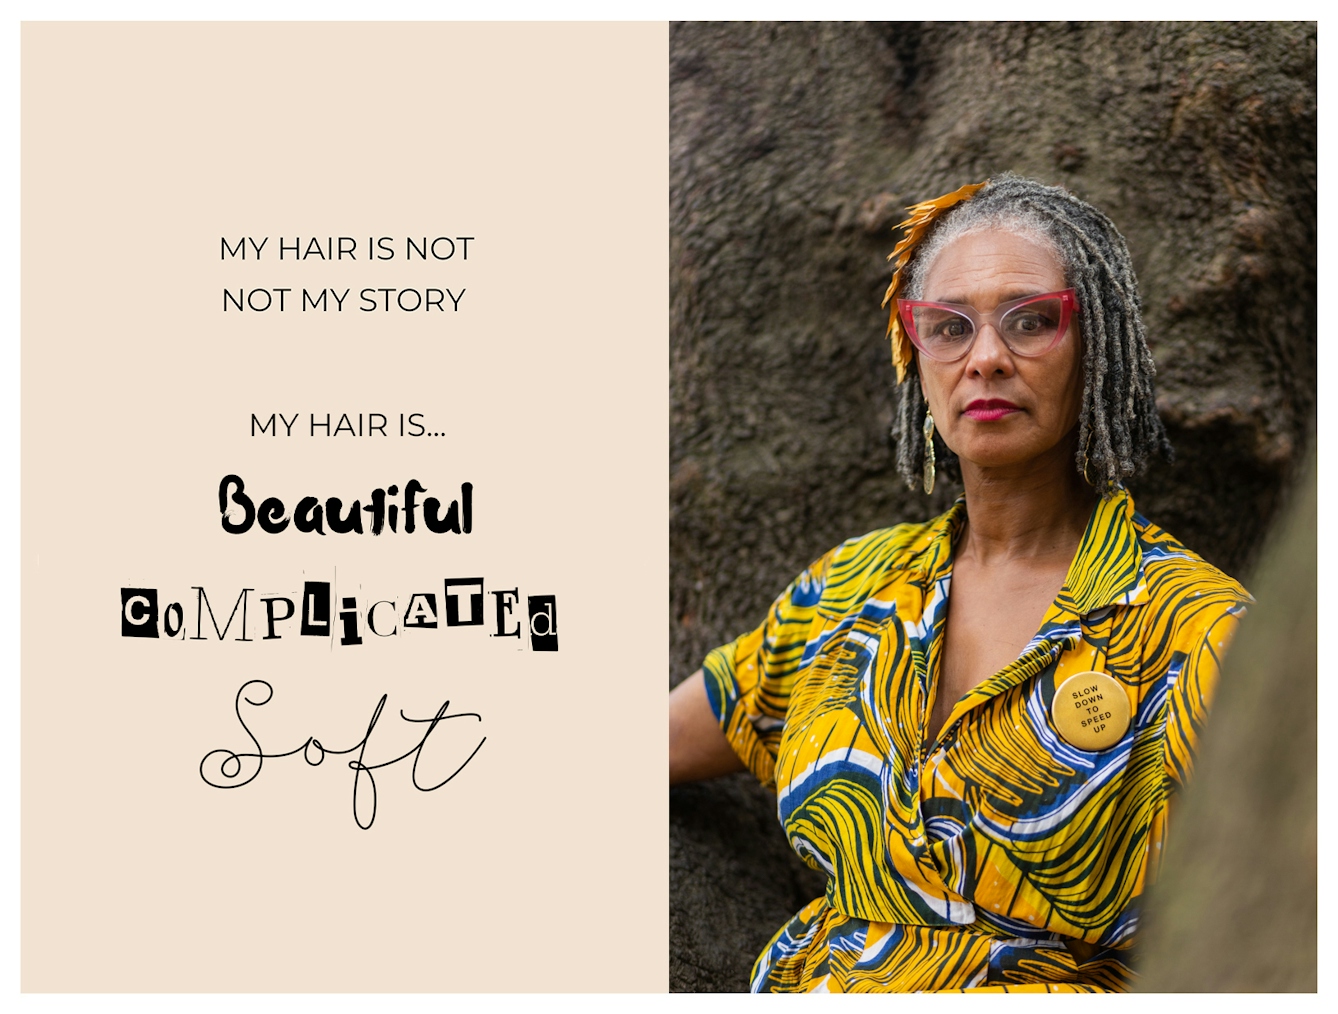 Photographic portrait and graphic design laid out next to each other. On the right is a portrait of a Black woman from the waist up in a bright yellow dress, sat against a tree trunk. She has grey locs in a bob and is looking to camera with a relaxed neutral expression. The graphic to the left has a beige background on which are the words 'My hair is not my story. My hair is...beautiful, complicated, soft'. These last three words are each in a different font to emphasise their meaning.